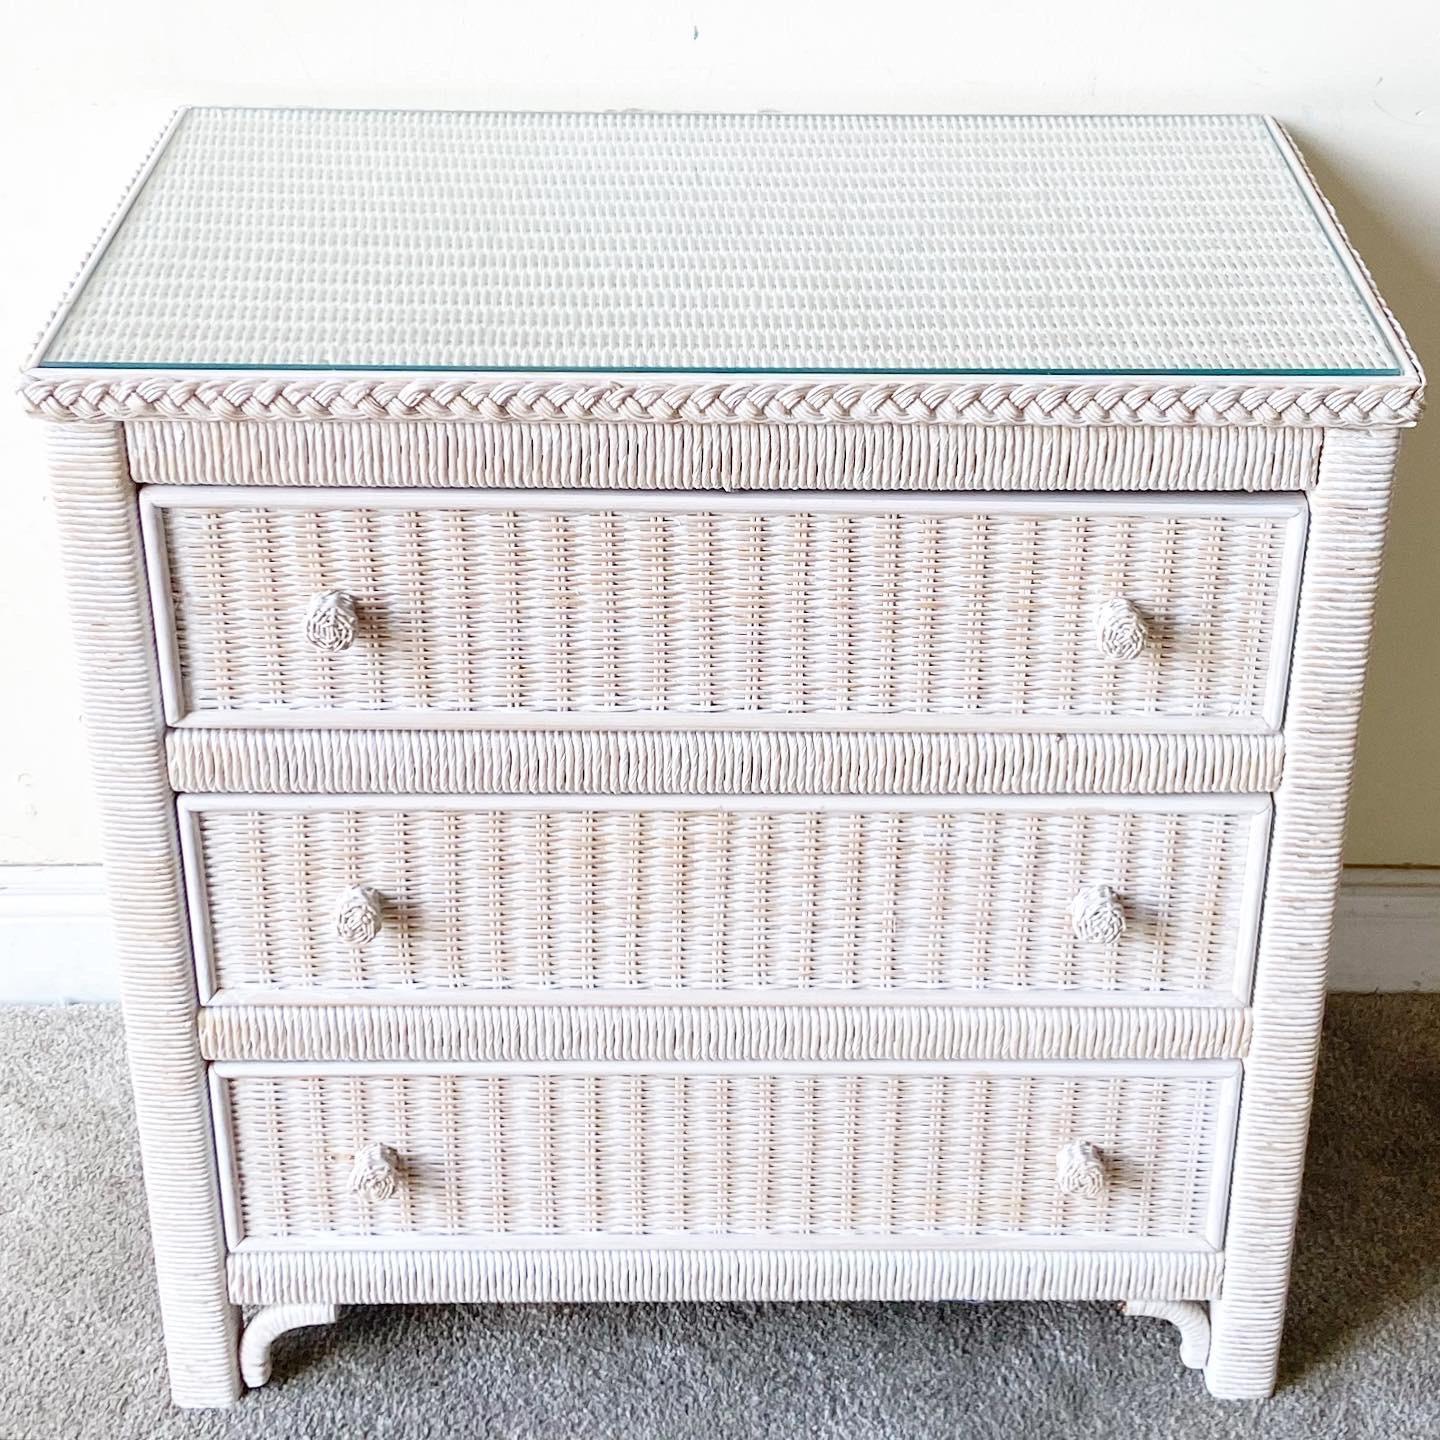 Incredible 3 drawer dresser with a glass top by Henry Link for Lexington furniture Co. Features wicker woven through out with a rattan frame.

